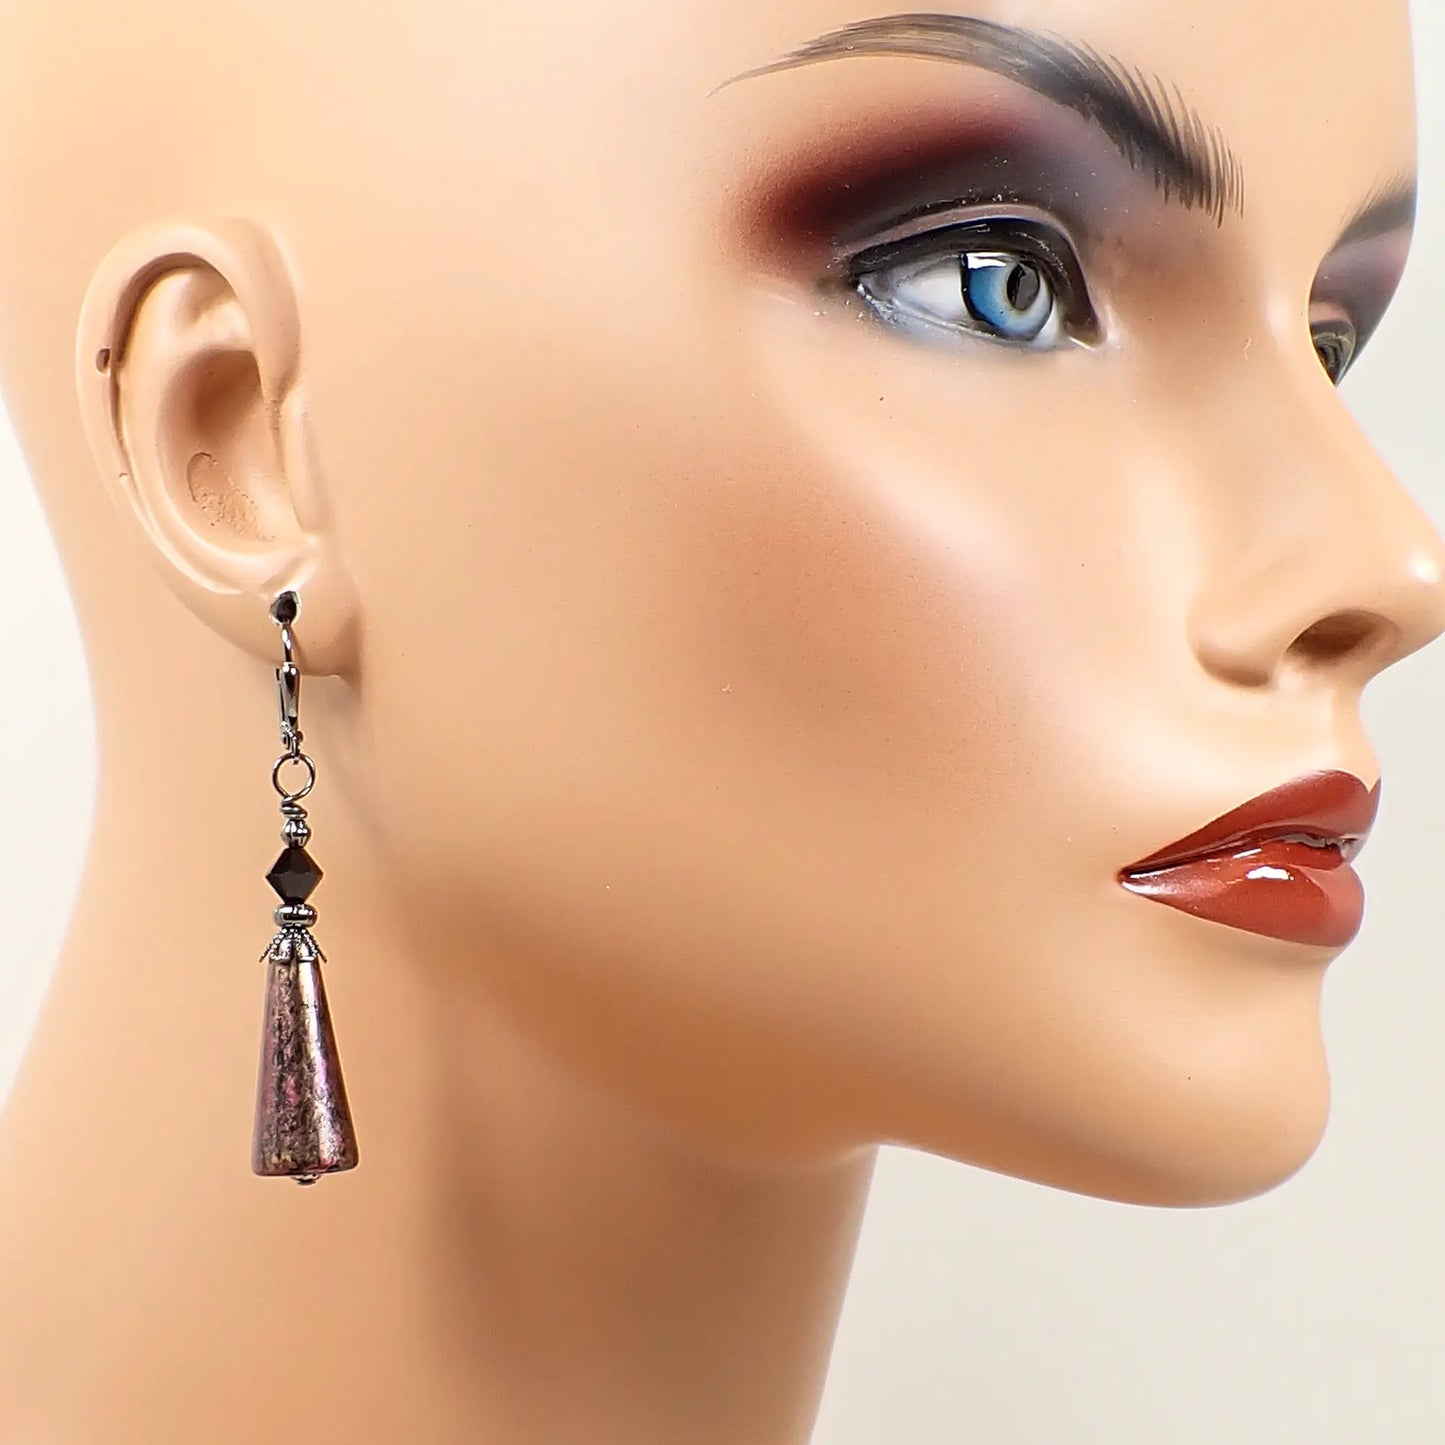 Metallic Pink and Gold Color Over Black Handmade Cone Earrings Gunmetal Hook Lever Back or Clip On